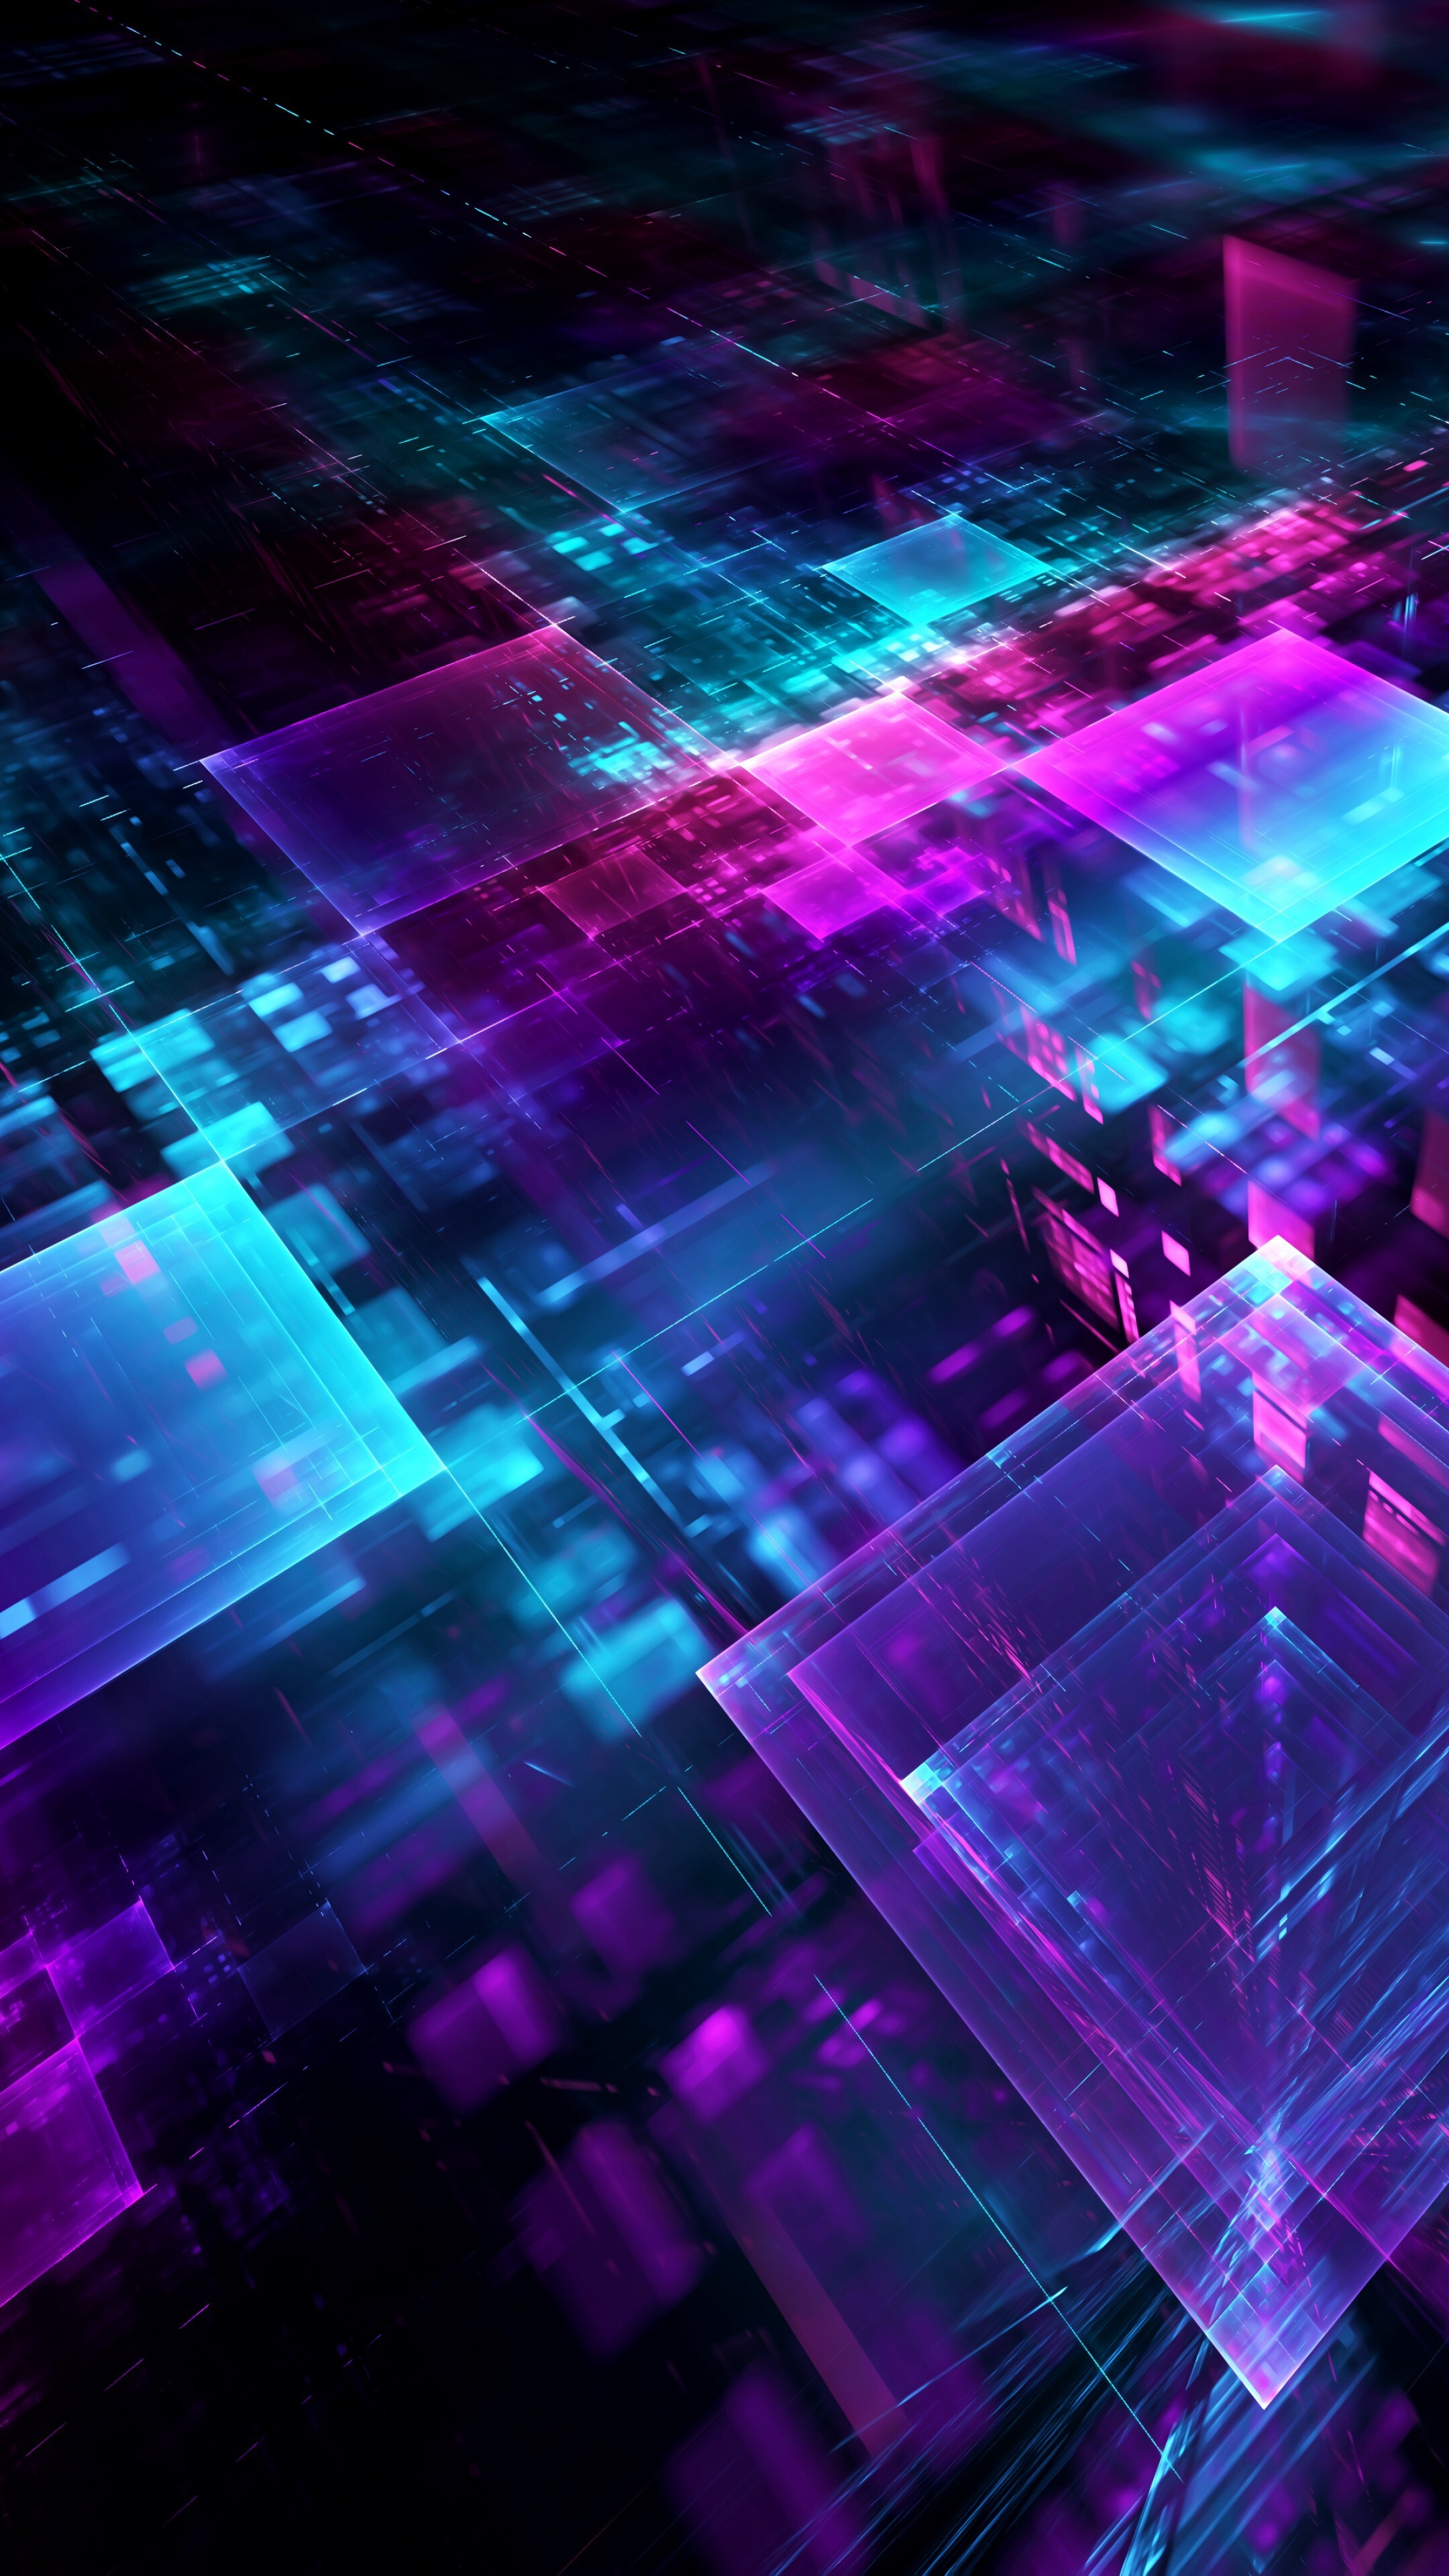 Geometric Abstract: Digital cubes, Lines, Squares, Three-dimensional space. 2160x3840 4K Wallpaper.